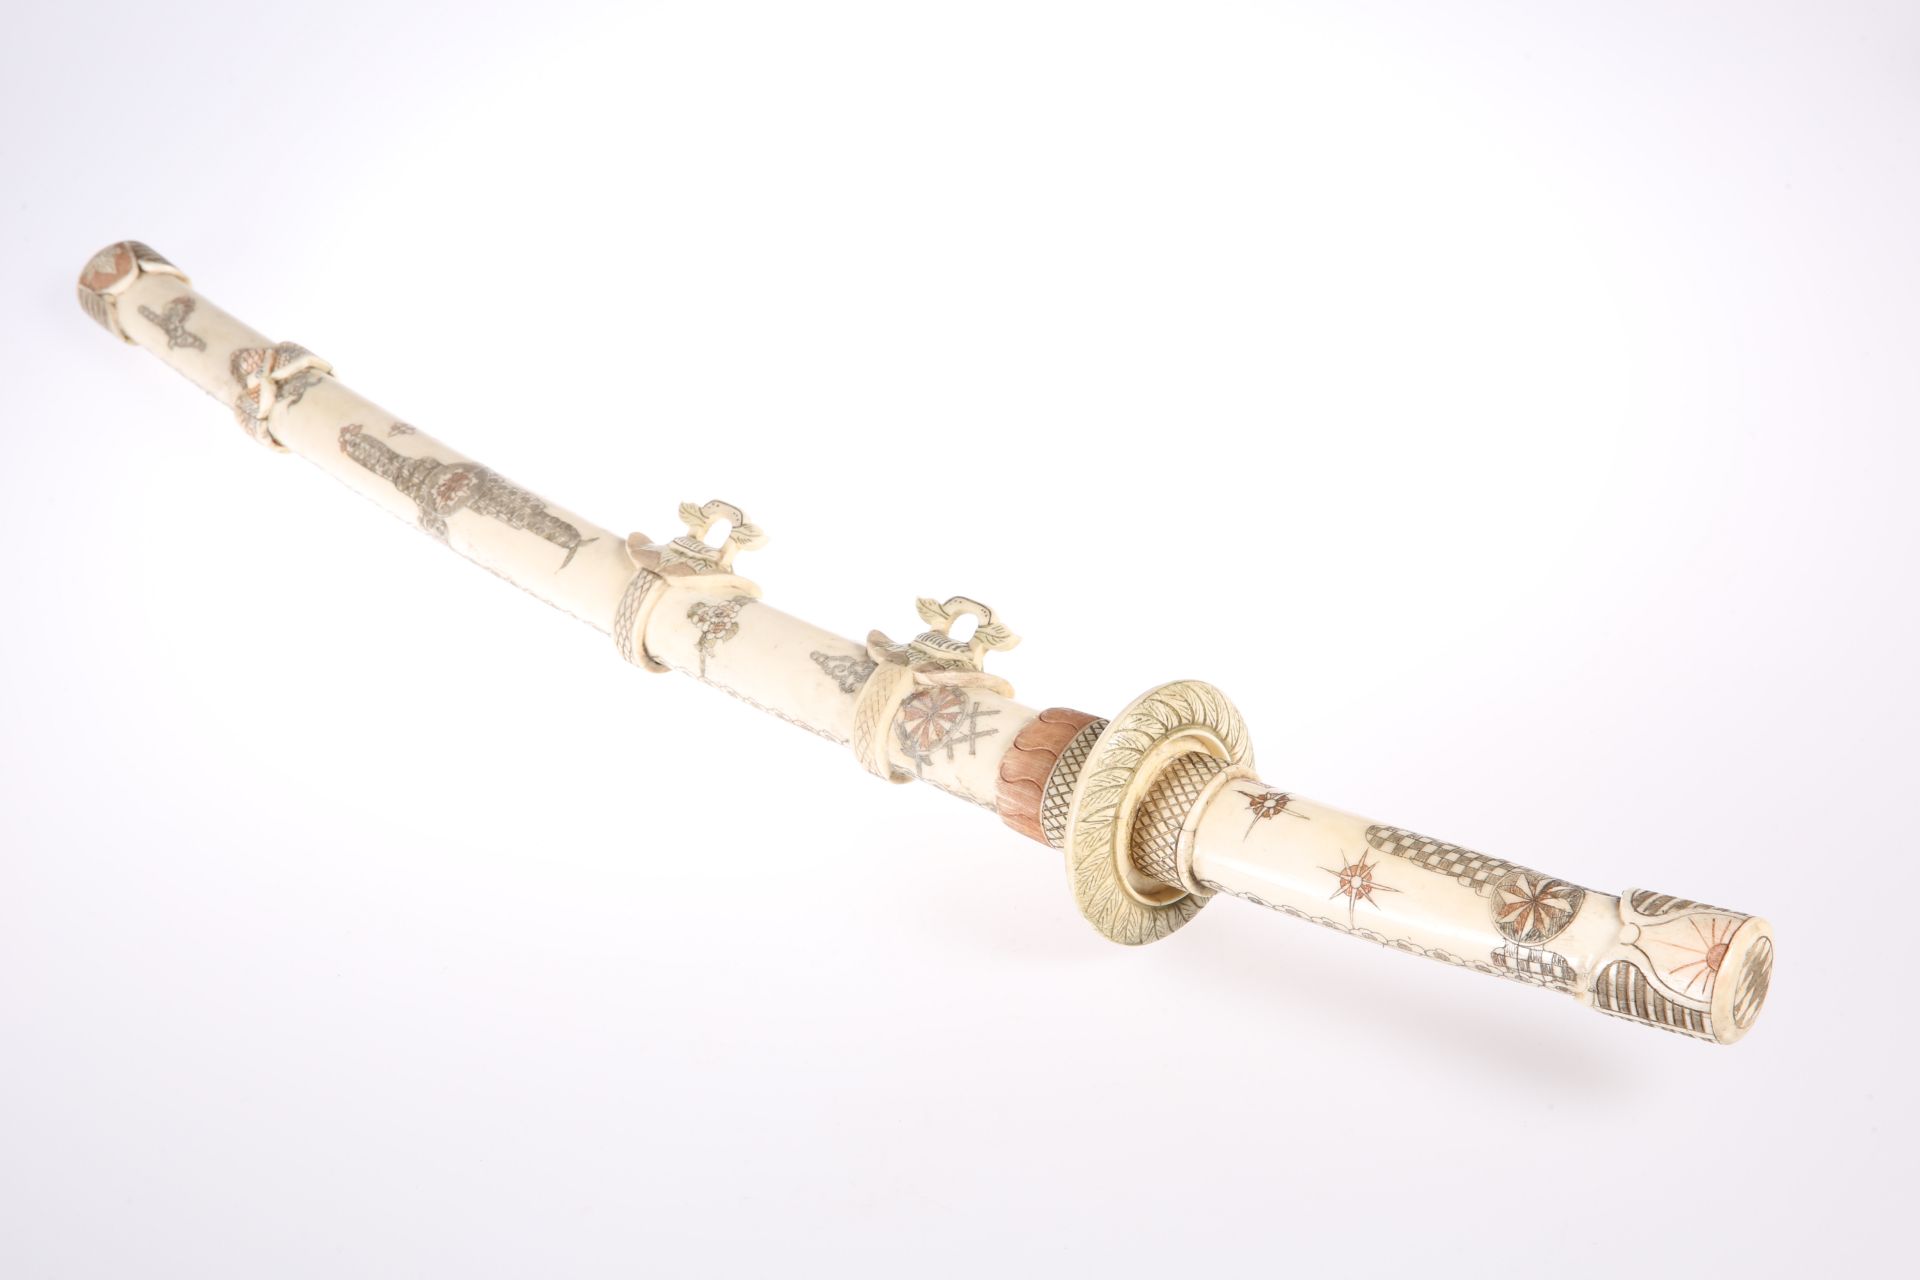 A JAPANESE BONE SWORD, CIRCA 1900, with engraved and stained decoration, 17-inch bone blade. 80cm